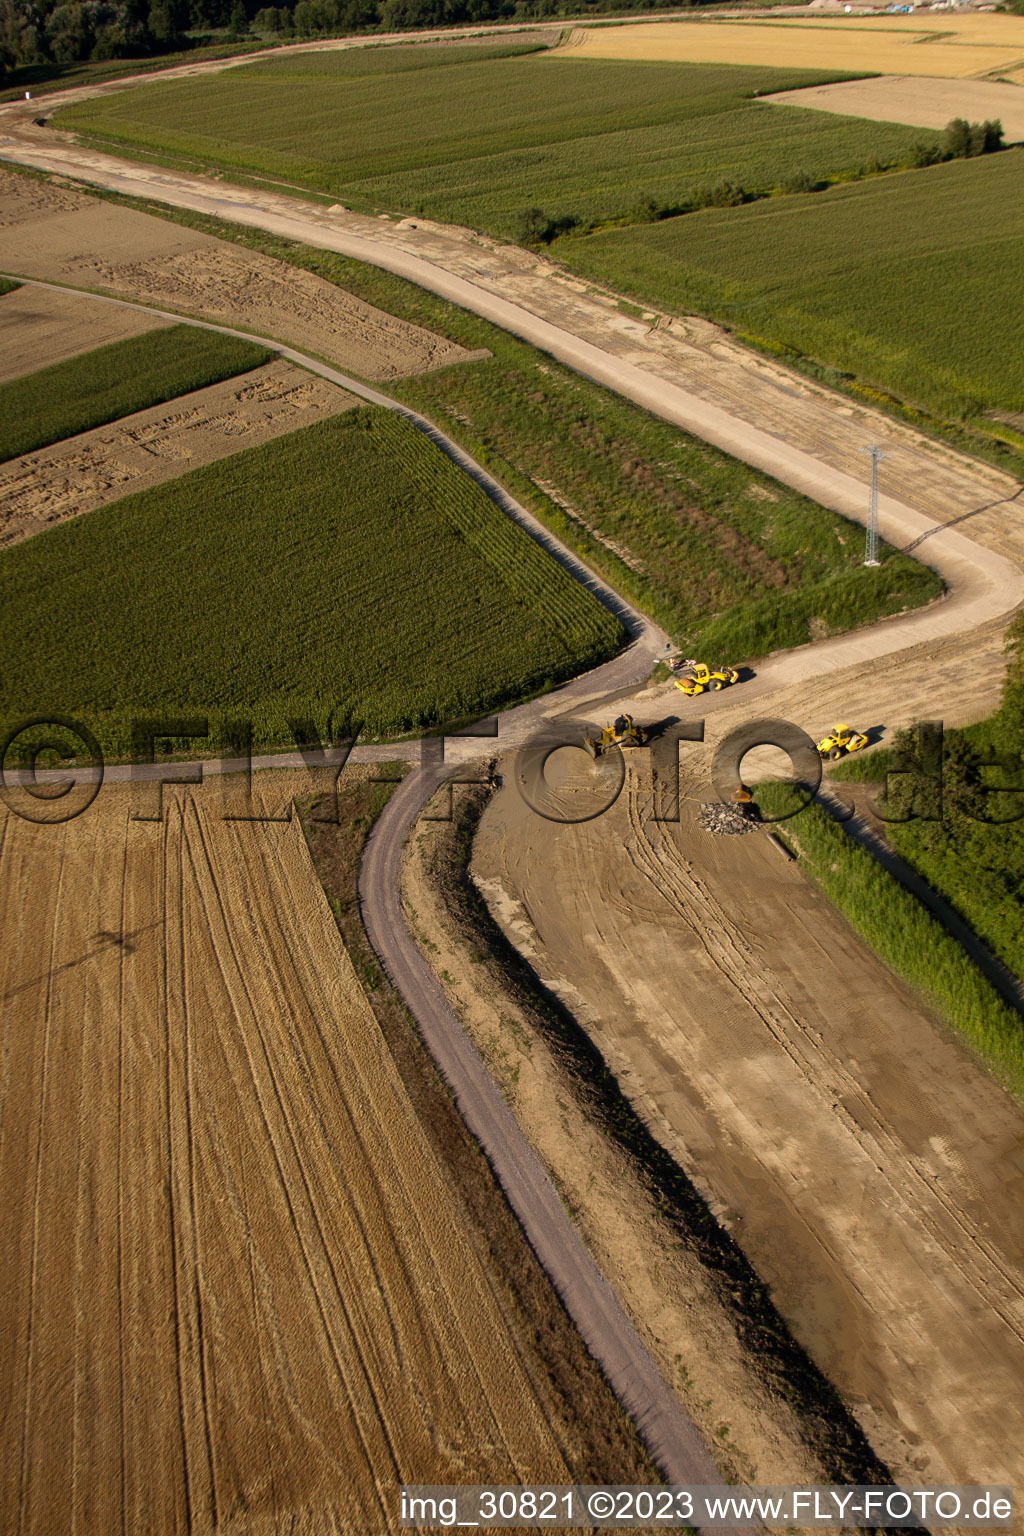 Oblique view of Polder construction in Neupotz in the state Rhineland-Palatinate, Germany